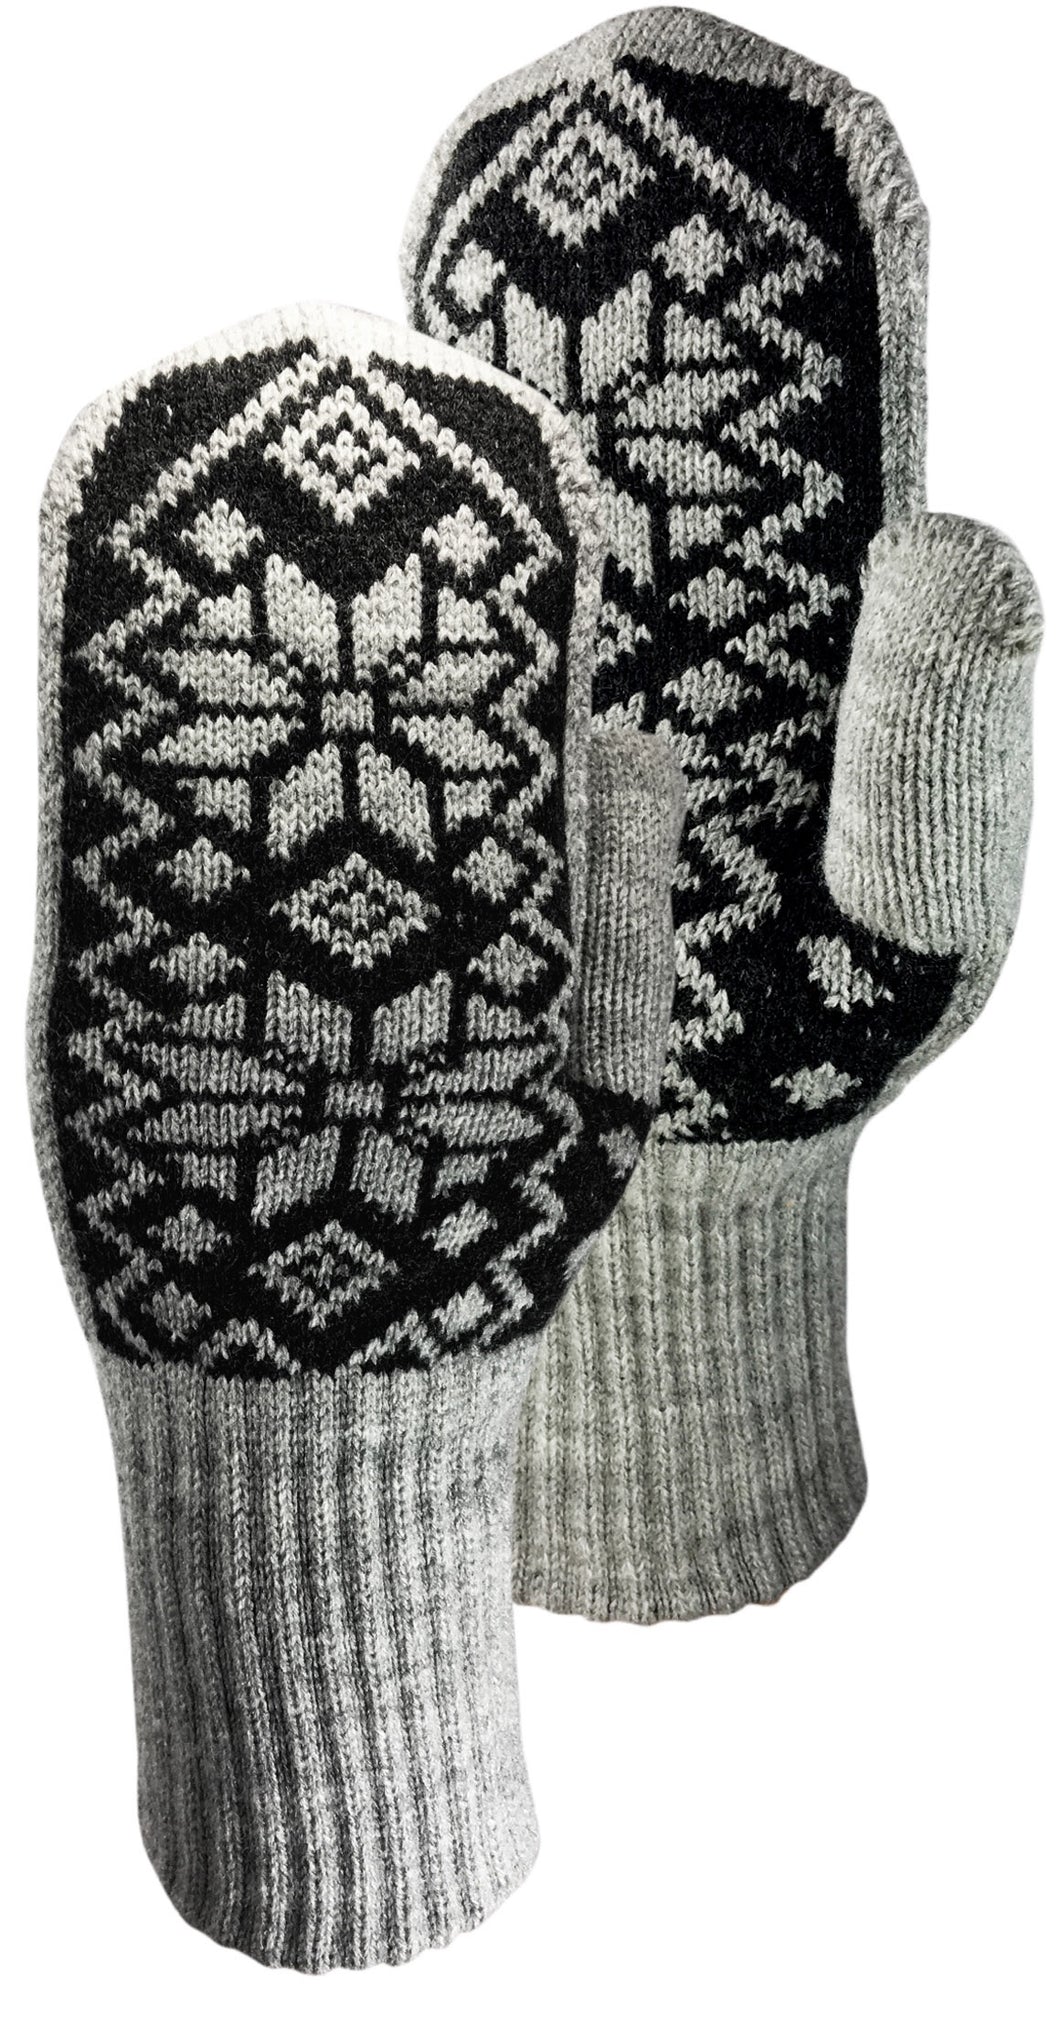 Norwegian Flakes Mitts by Auclair